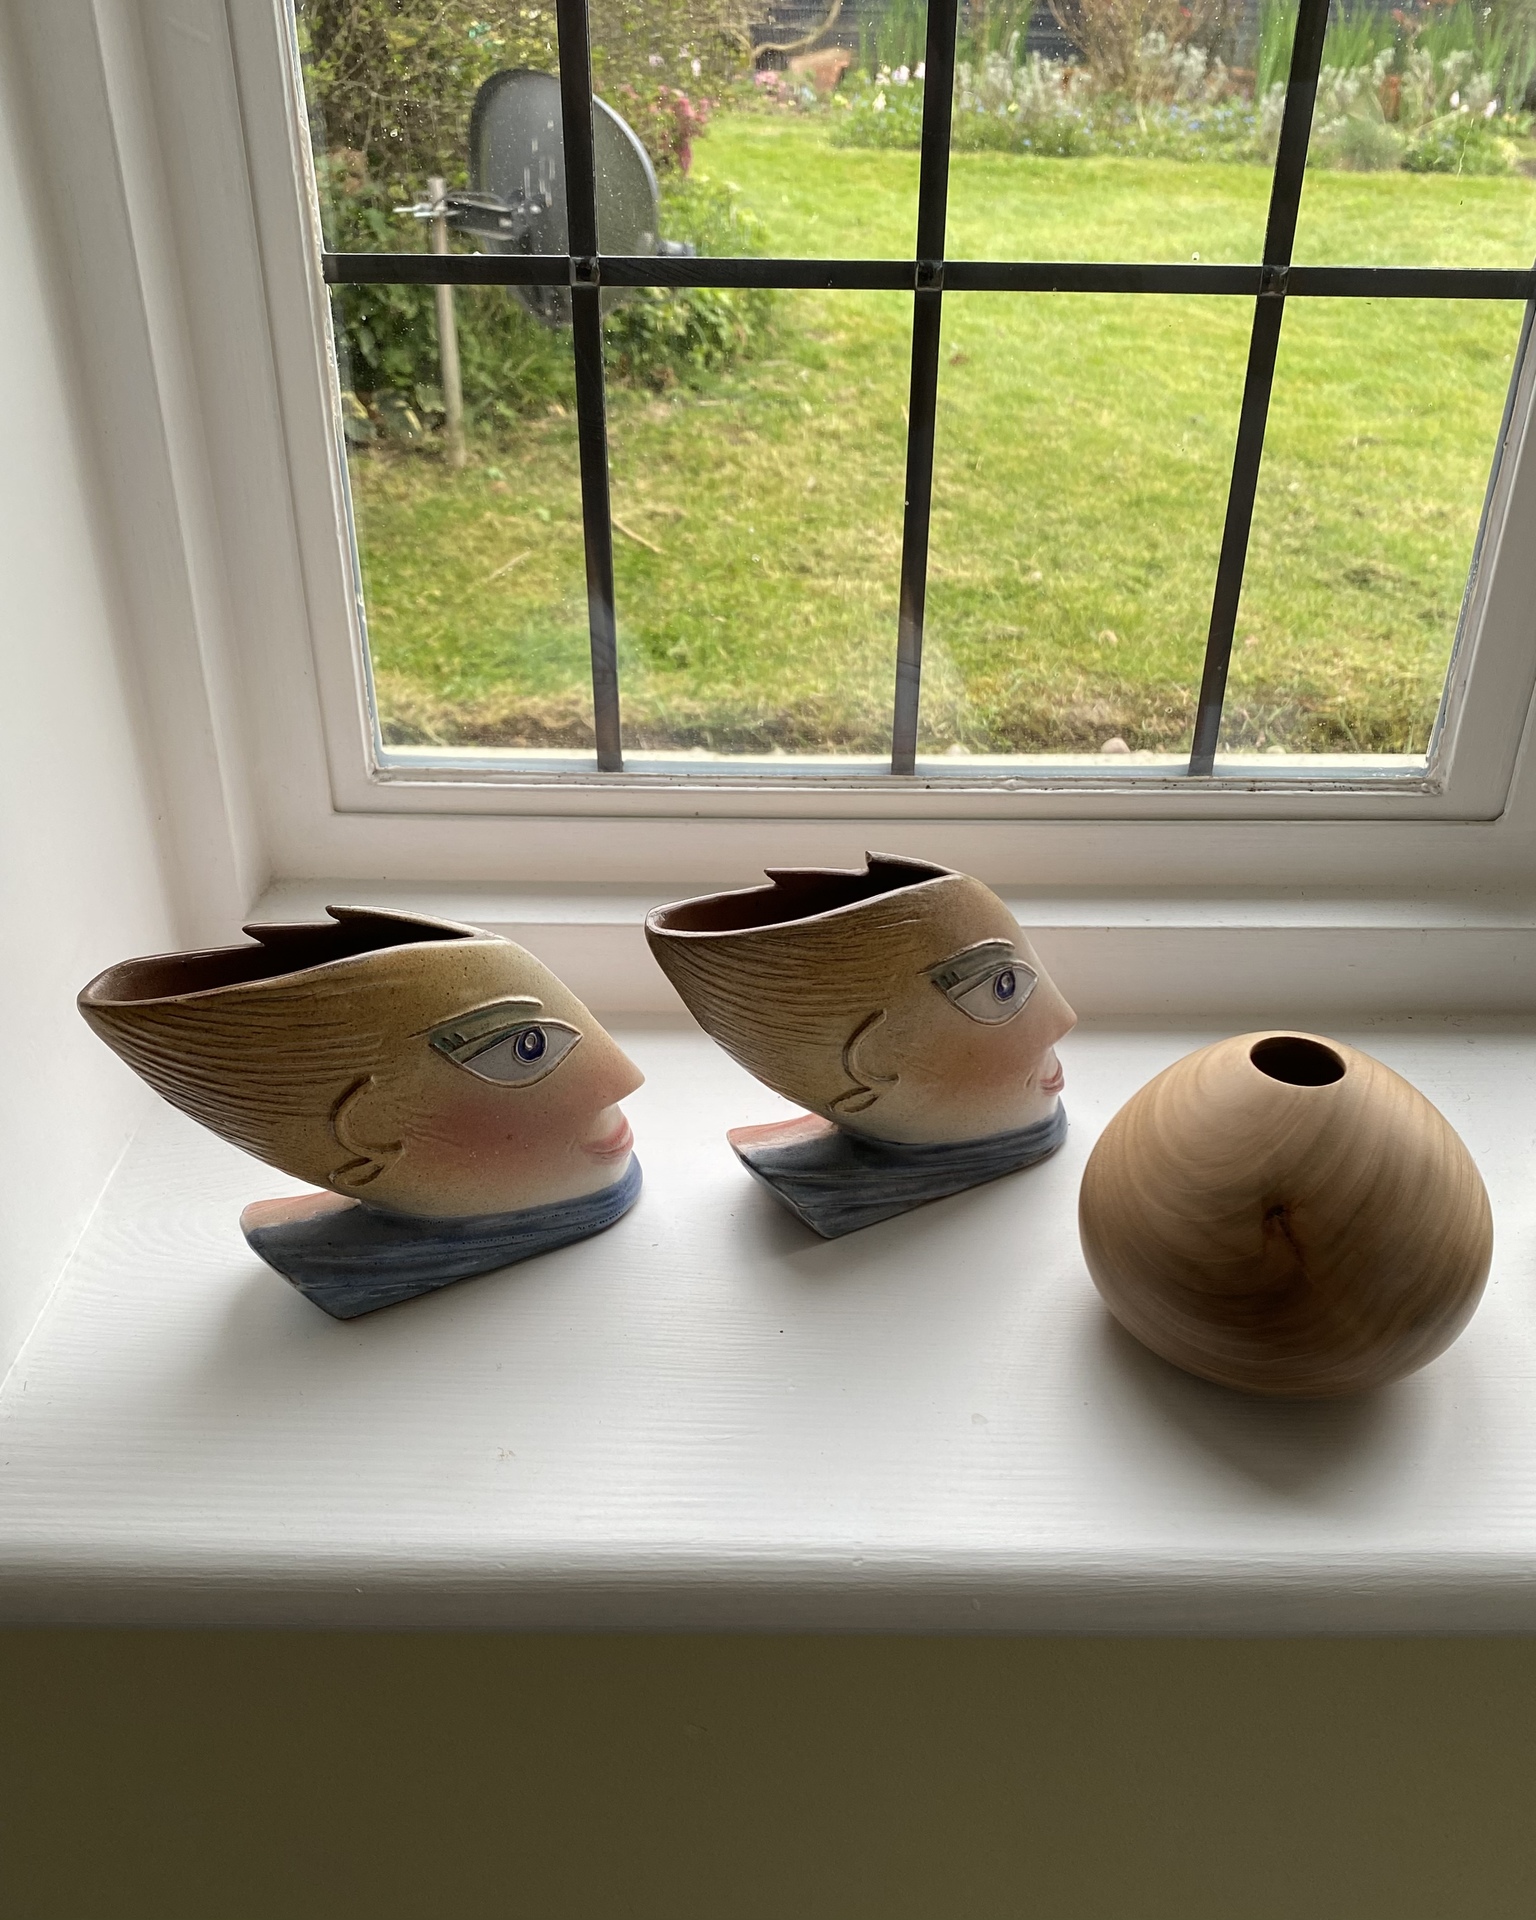 Works owned by Sarah from John Chipperfield and Jon Warnes